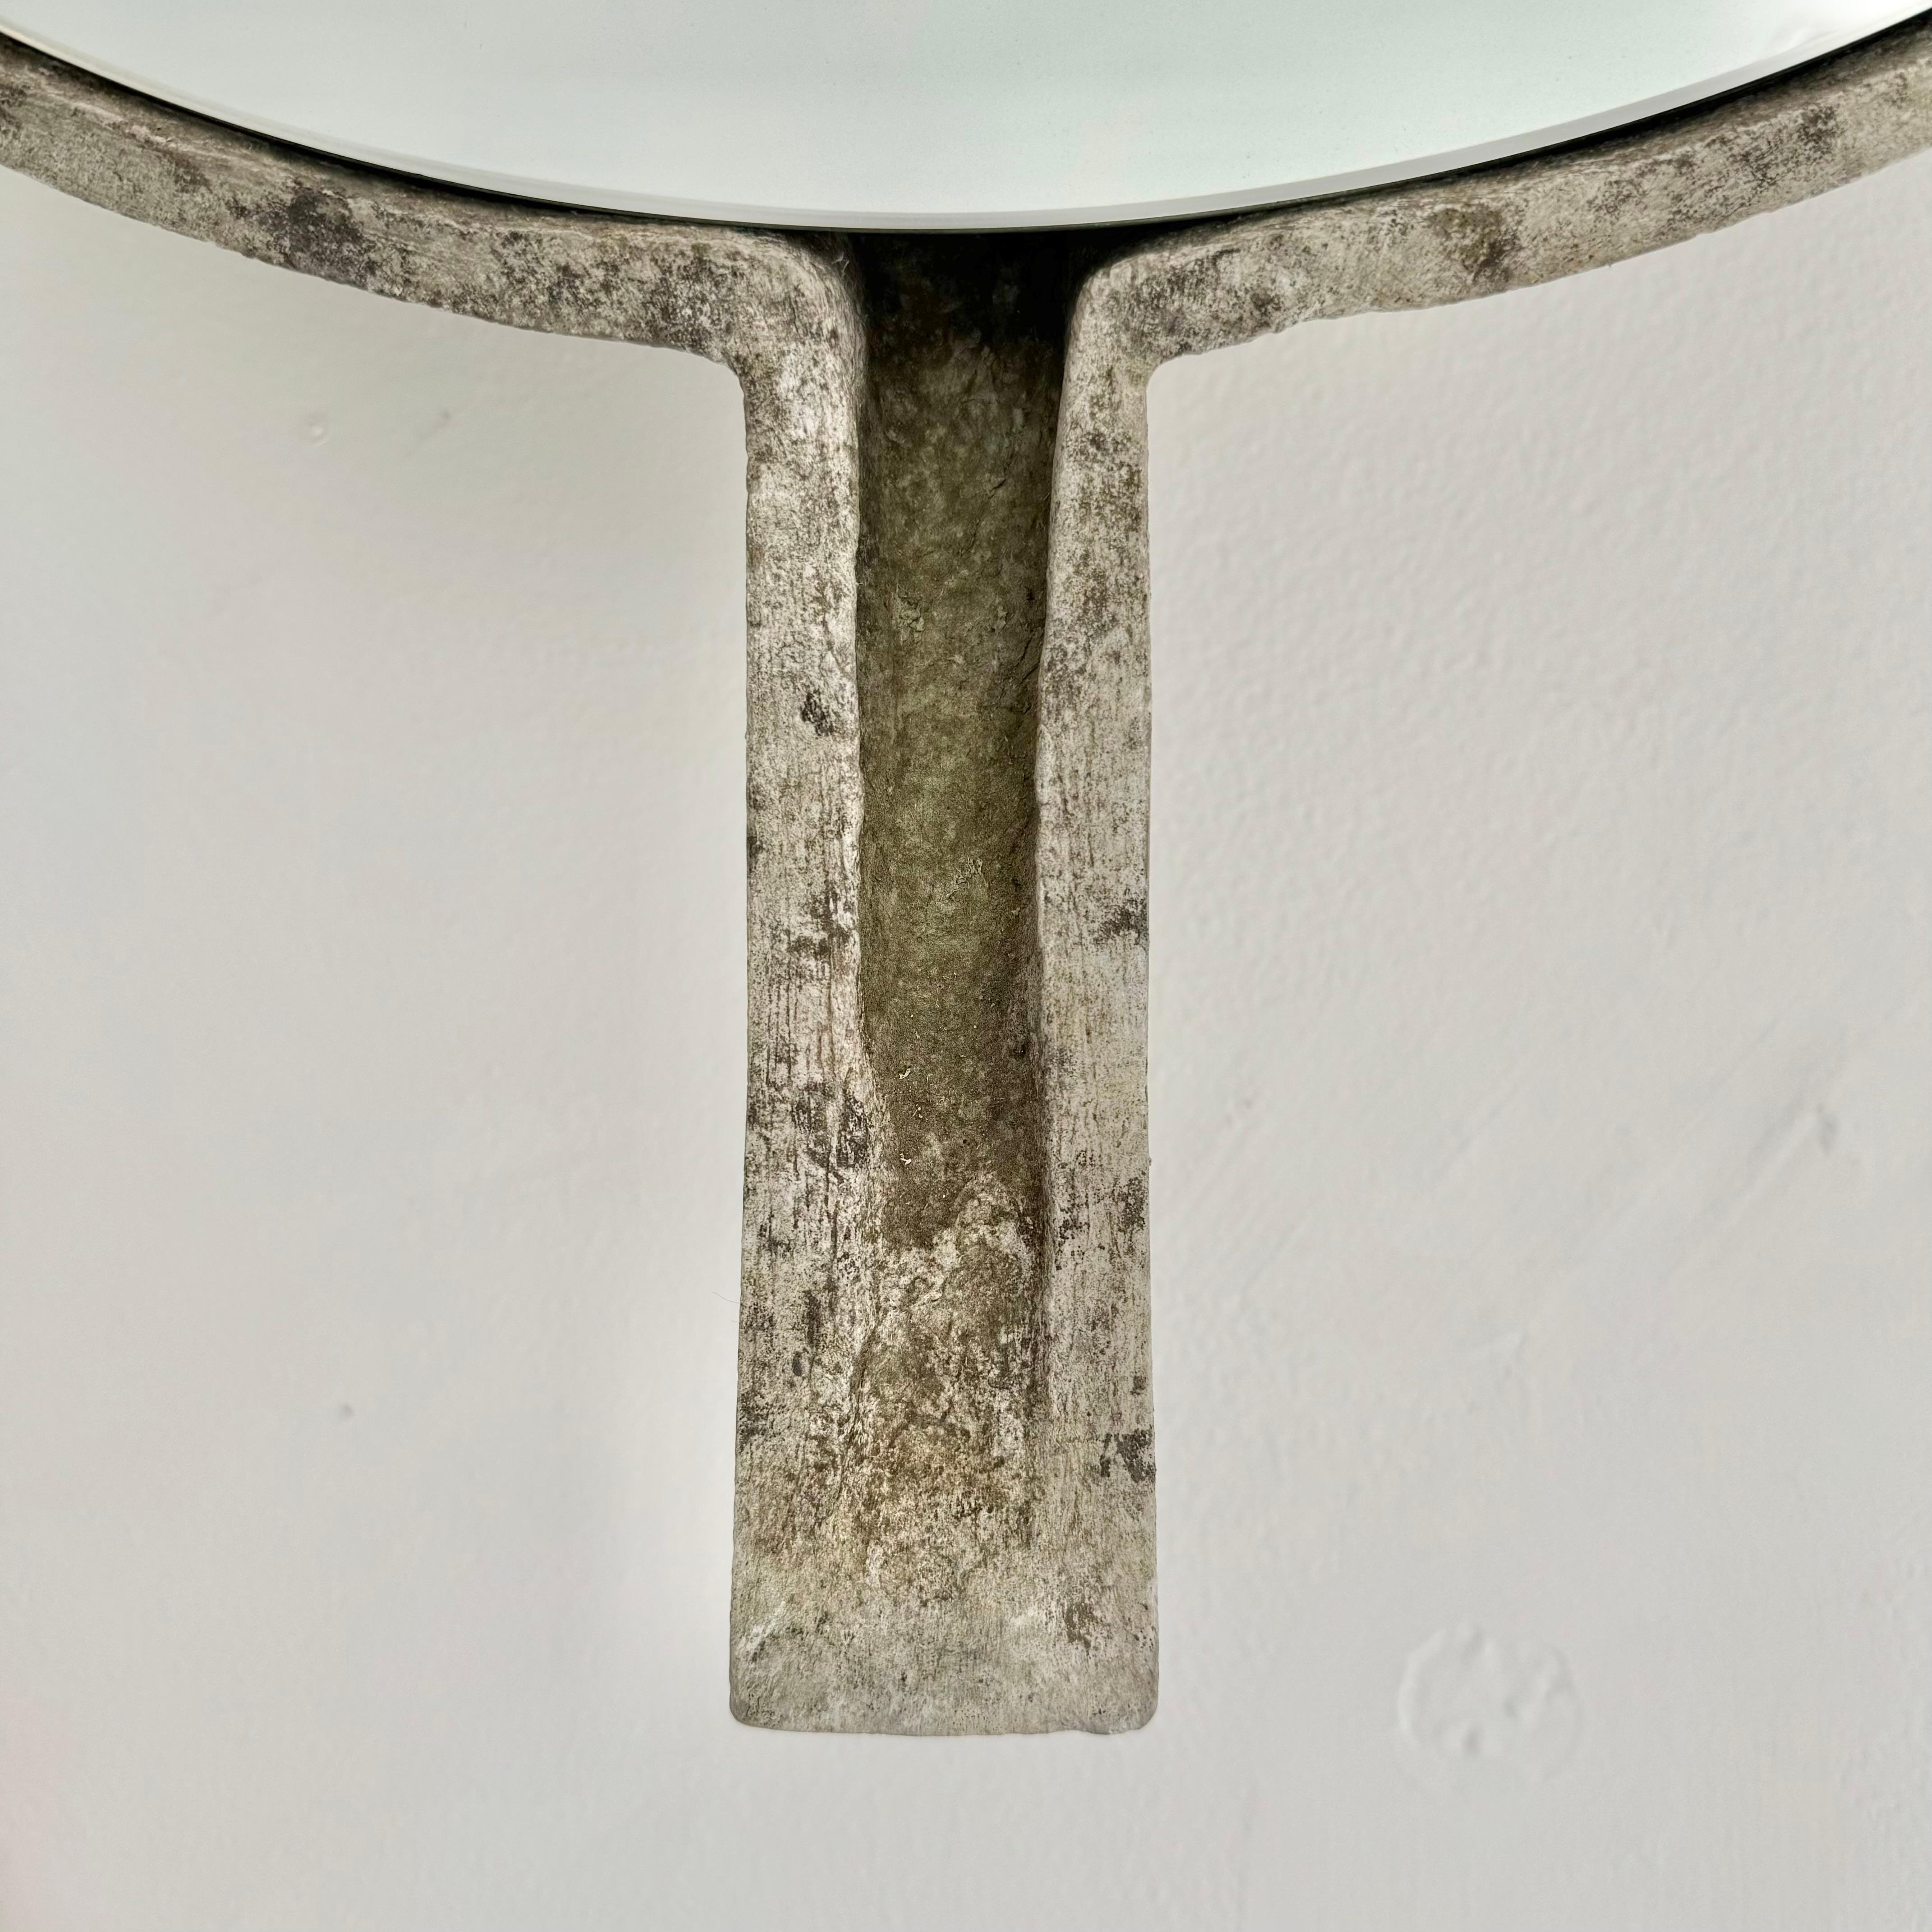 Mid-20th Century Willy Guhl Concrete Mirror with Spikes, 1960s Switzerland For Sale